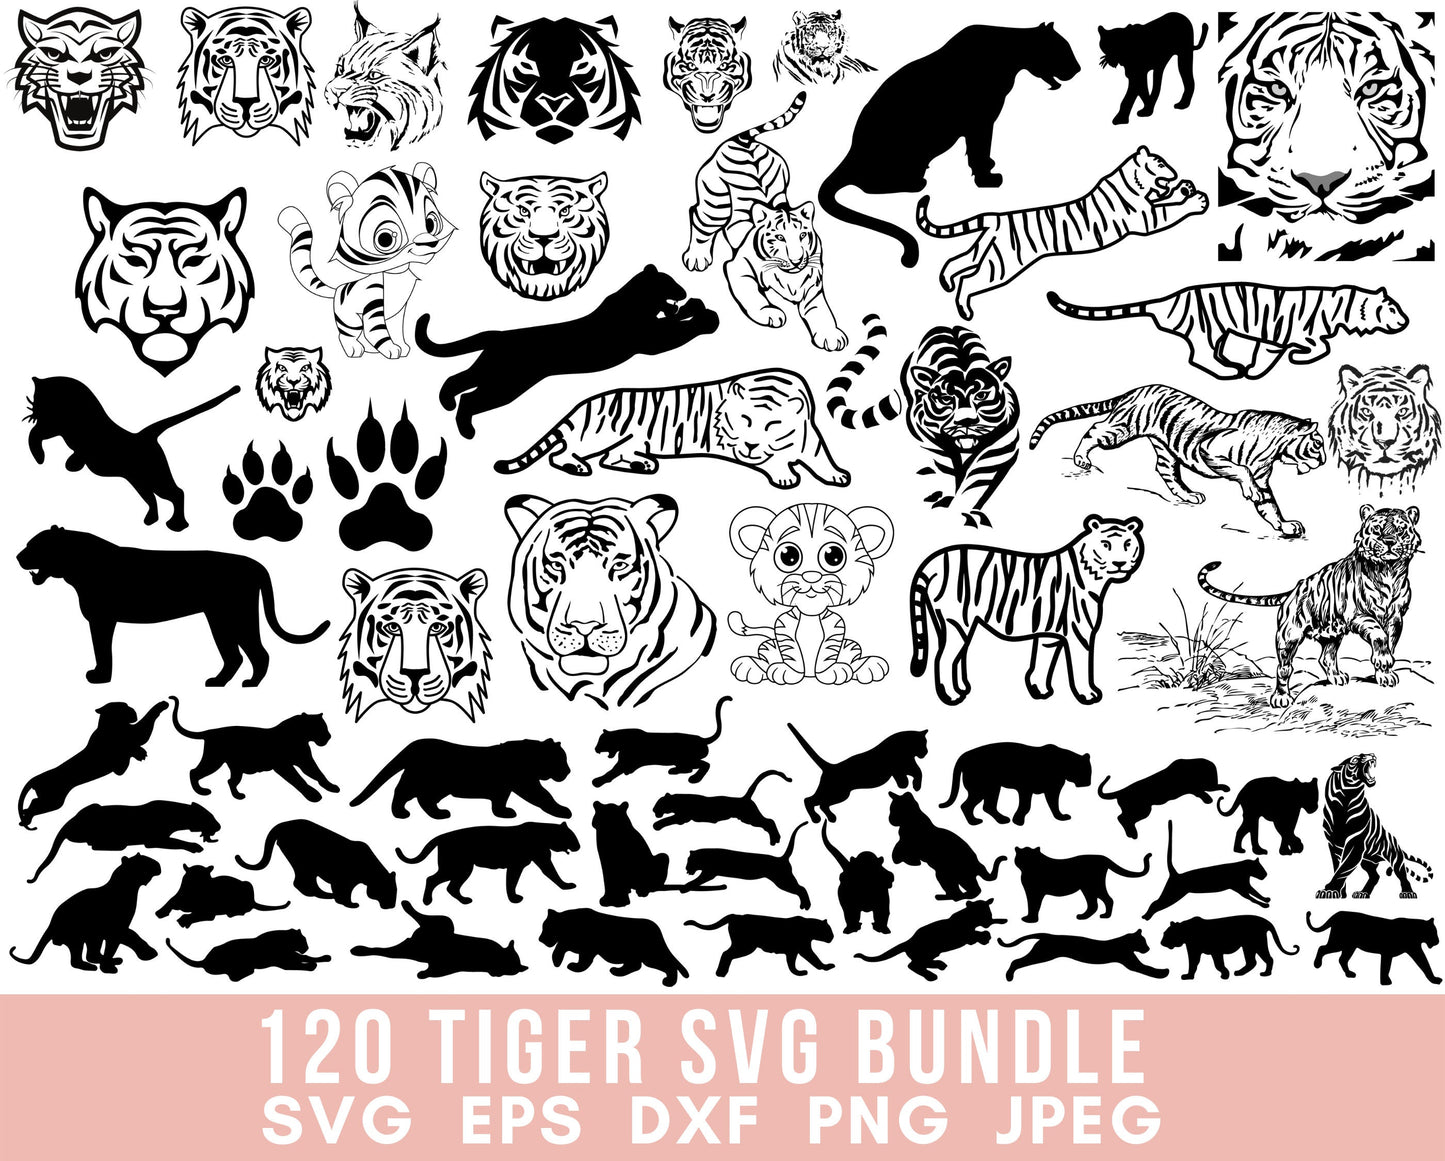 120 Tiger SVG Bundle Tiger Vector Tiger Silhouette Tiger Clipart Tiger cut file Year of the Tiger head wildflife animal Svg files for cricut